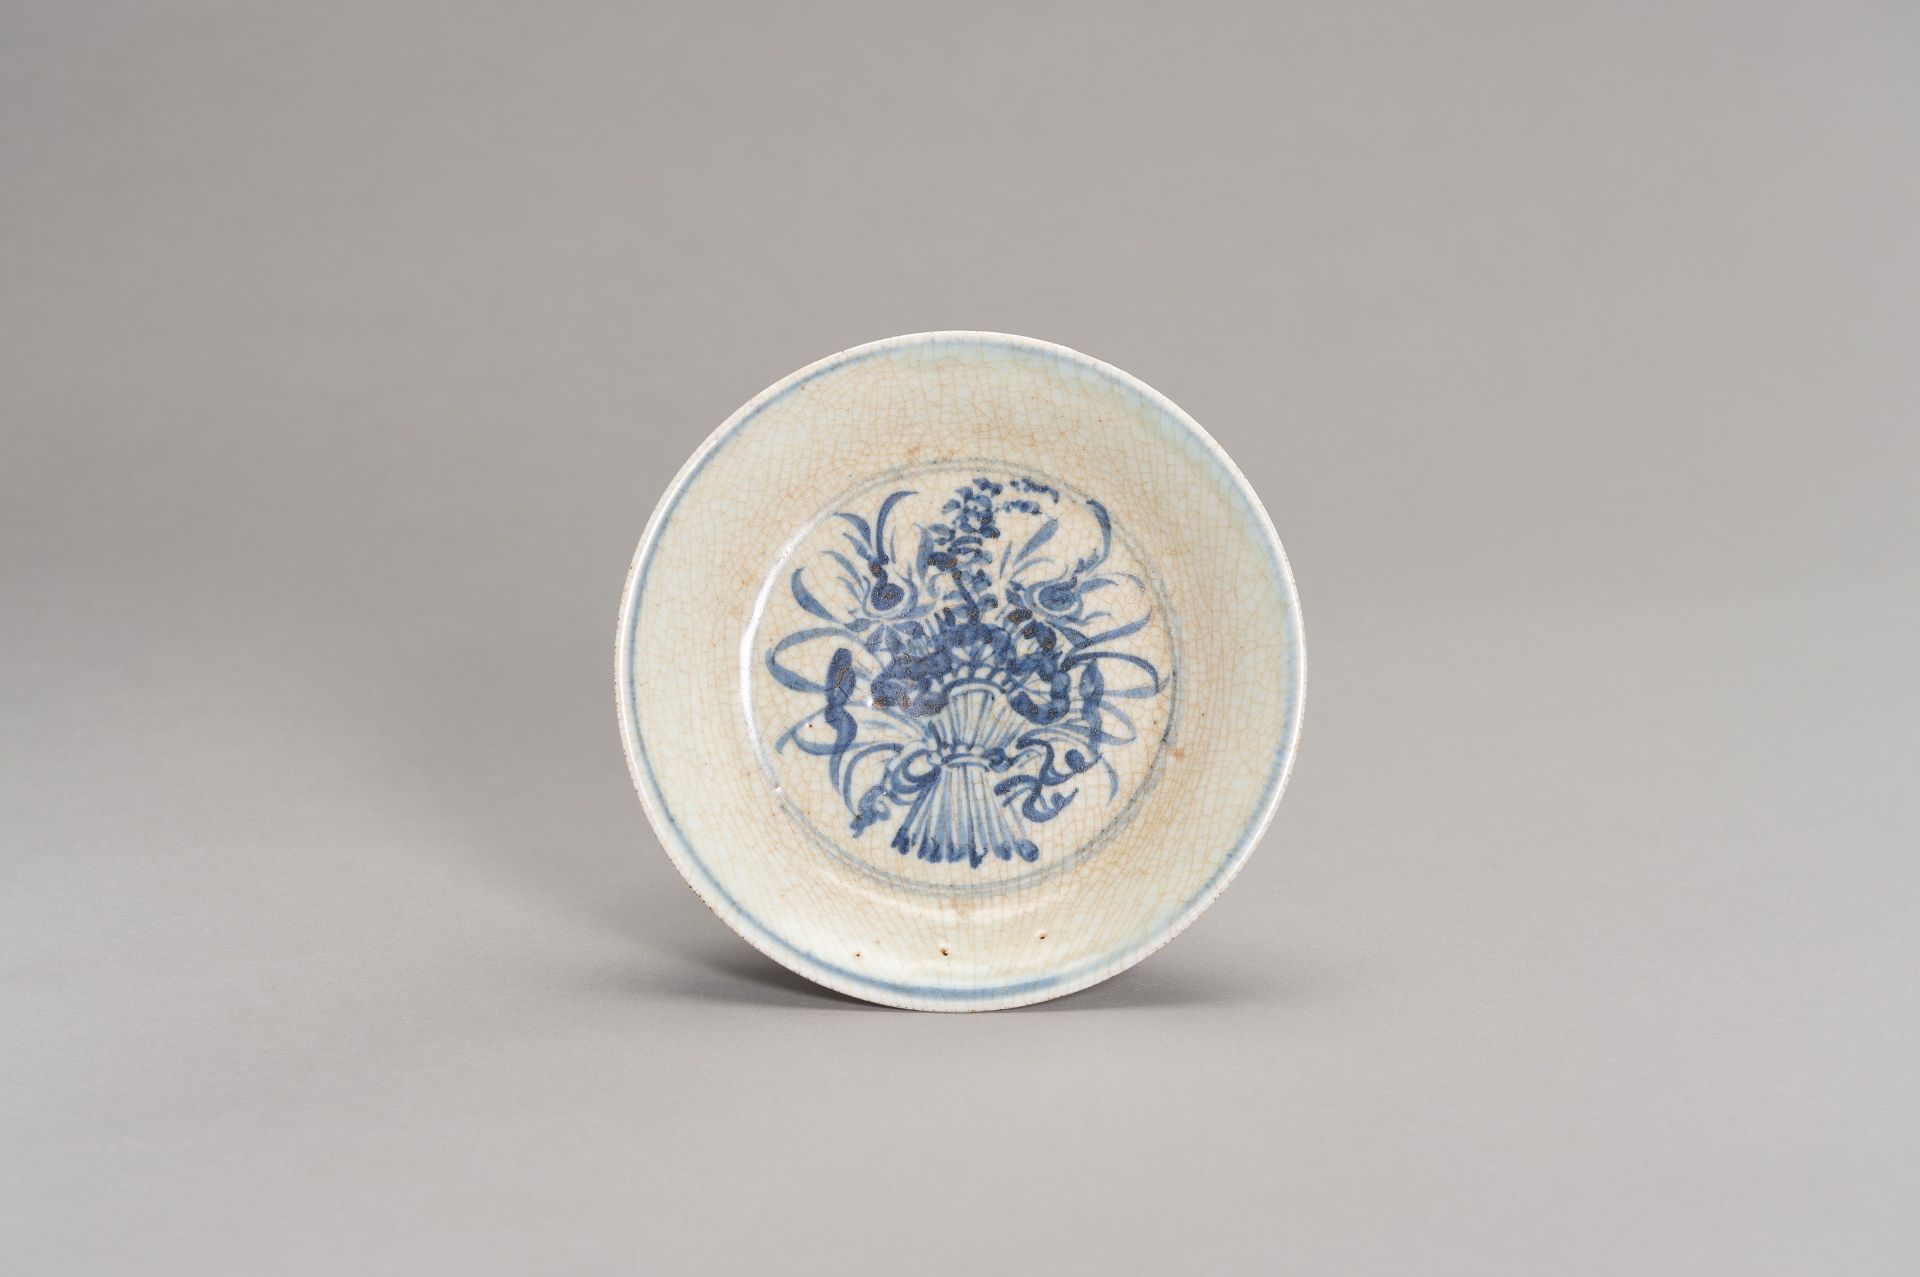 A CELADON AND BLUE DISH WITH A FLOWER BOUQUET